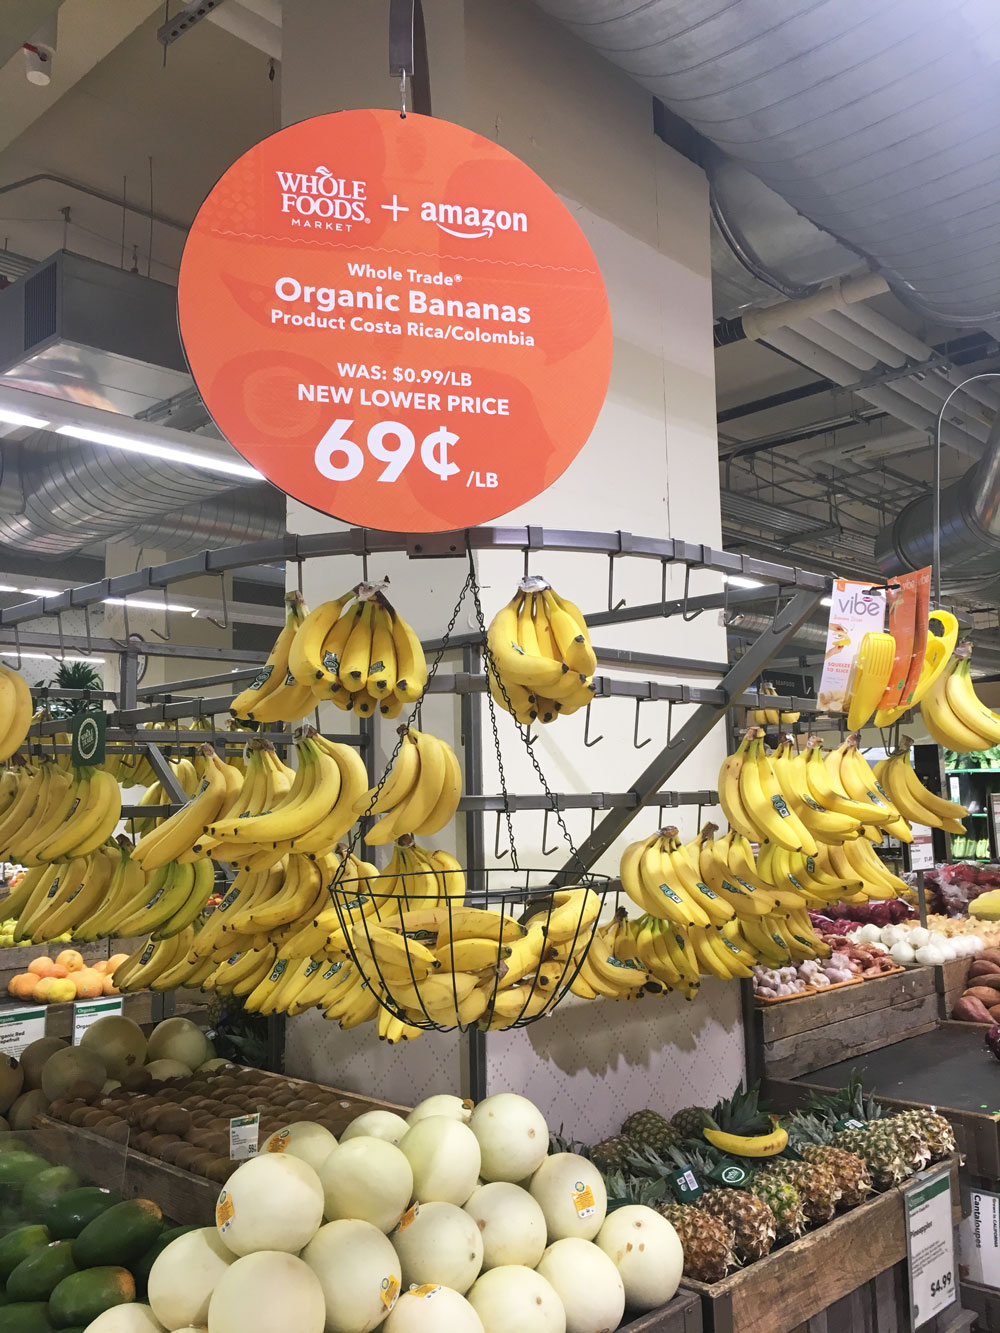 Amazon officially owns Whole Foods; here are the products that are getting marked down